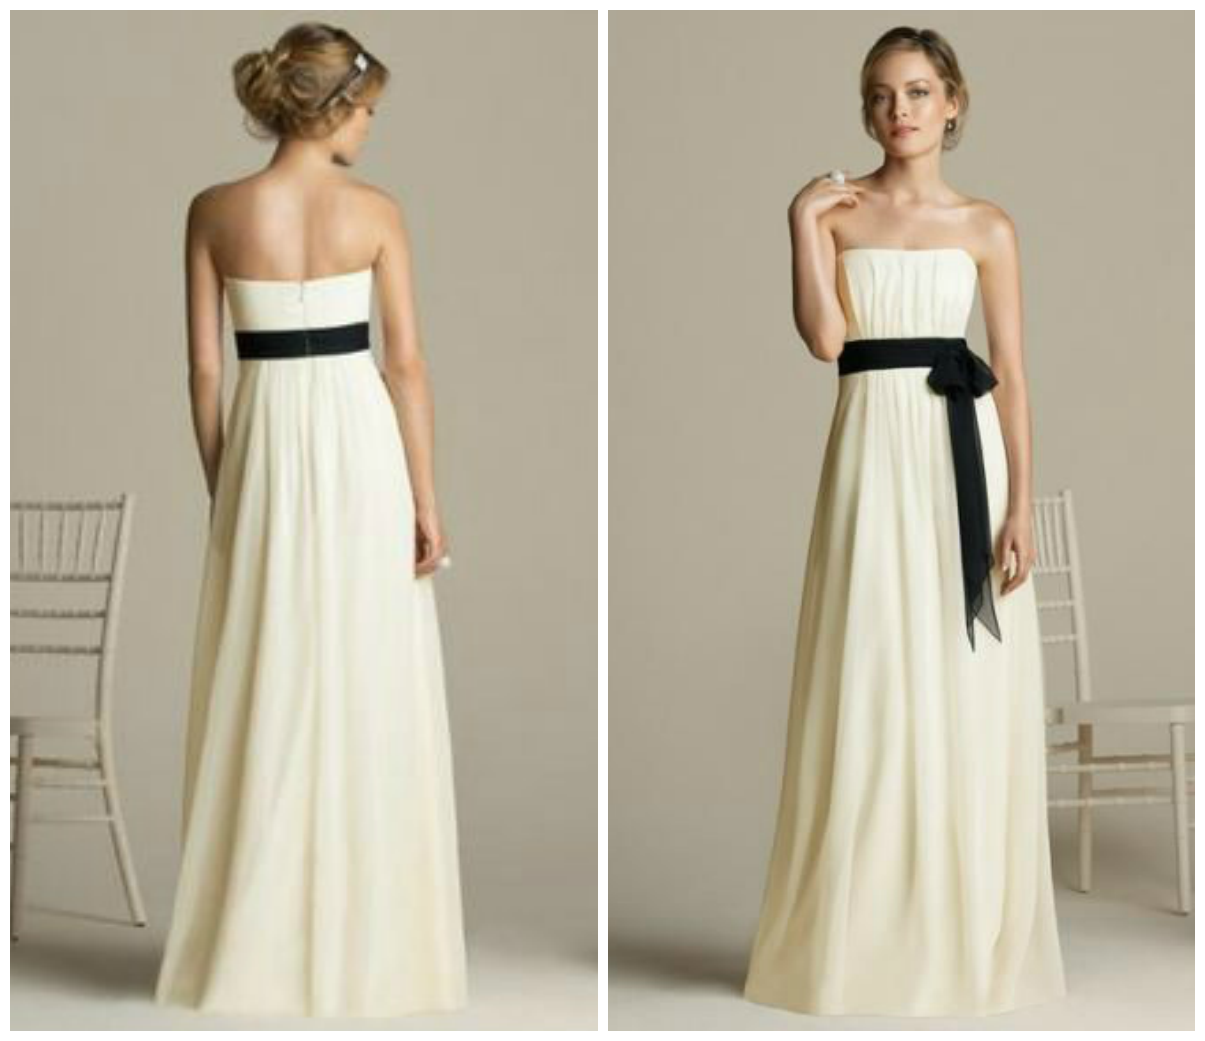 Strapless Bridesmaid Dress With Sash - Full Length Chiffon Gown - Custom Tailored - Available In Various Colors